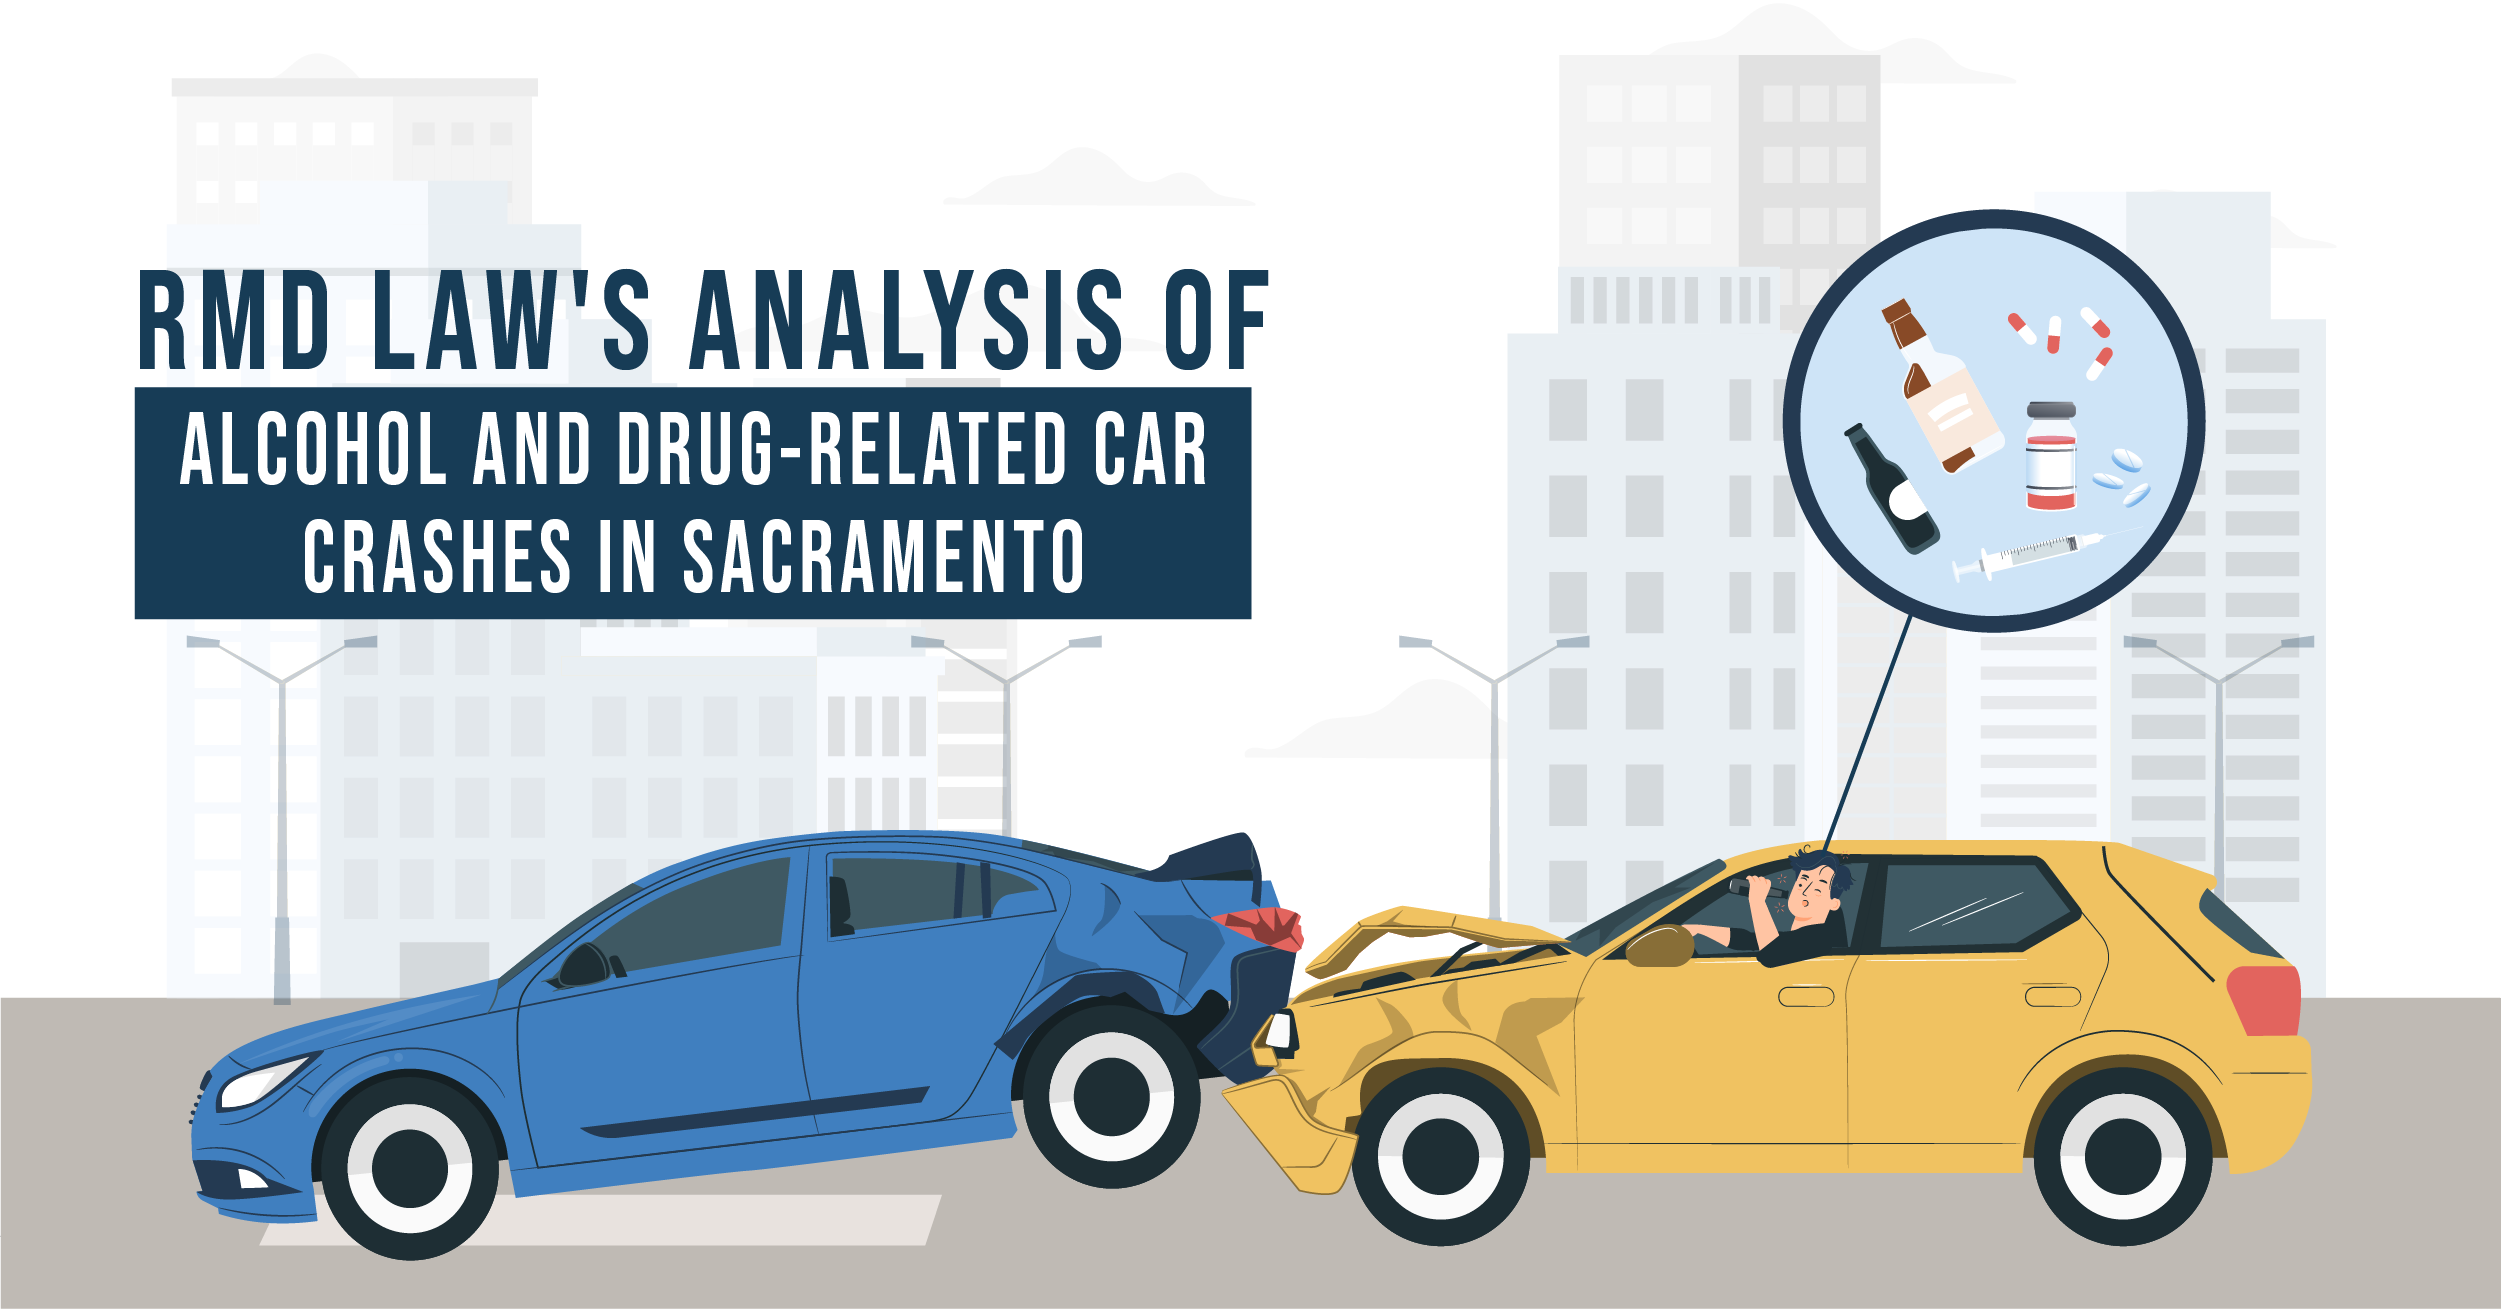 More than 55% of people involved in serious or fatal road accidents tested positive for drugs or alcohol: RMD Law's Analysis of Alcohol and Drug-related Car Crashes in Sacramento